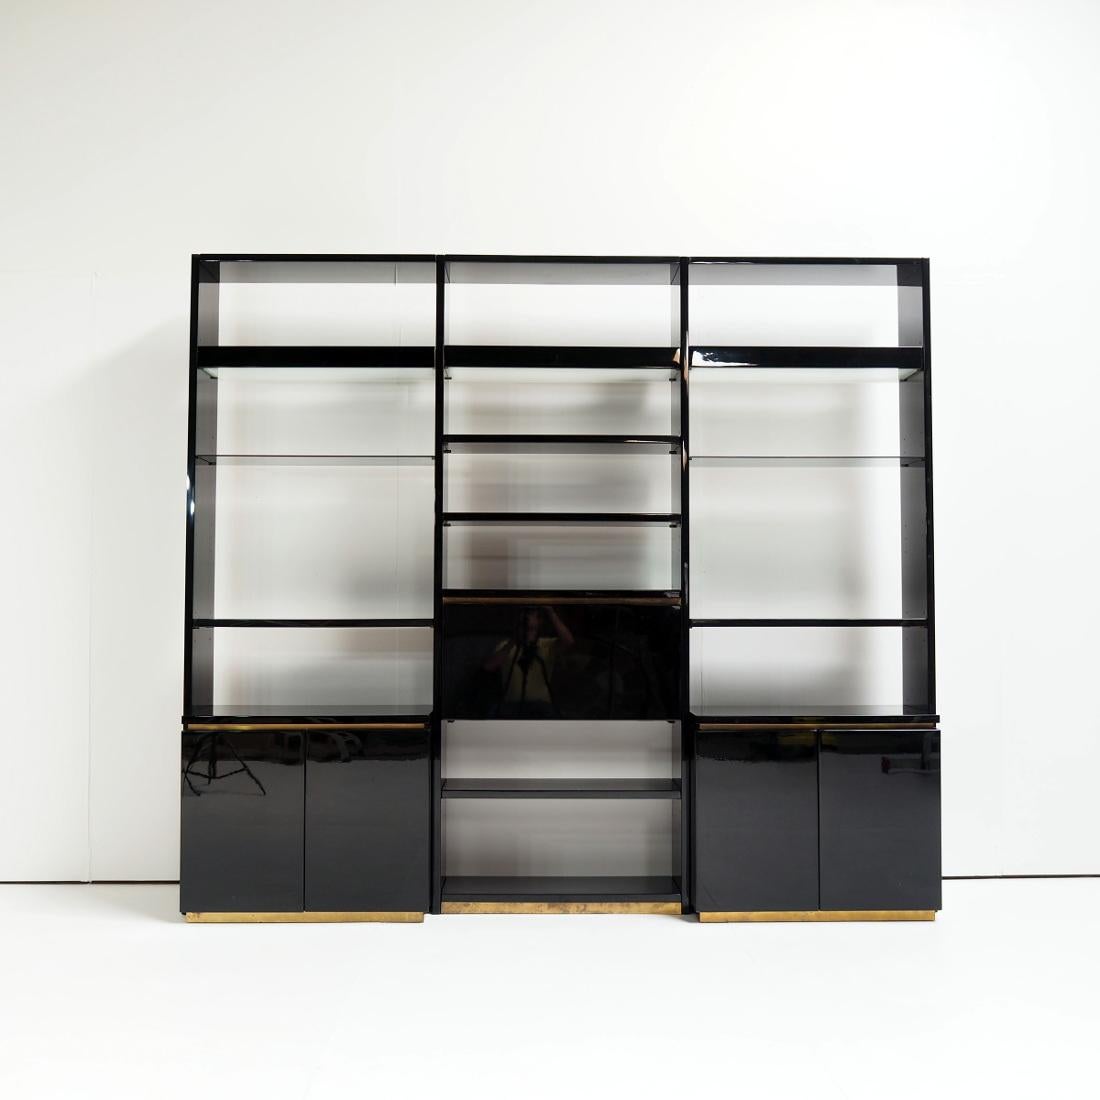 Beautiful wall unit designed in the 1970s by the French luxury designer Jean Claude Mahey.

The wall unit consists of three compartments, each with shelves and storage space where the middle compartment is a bar. Brass, glass and high-gloss